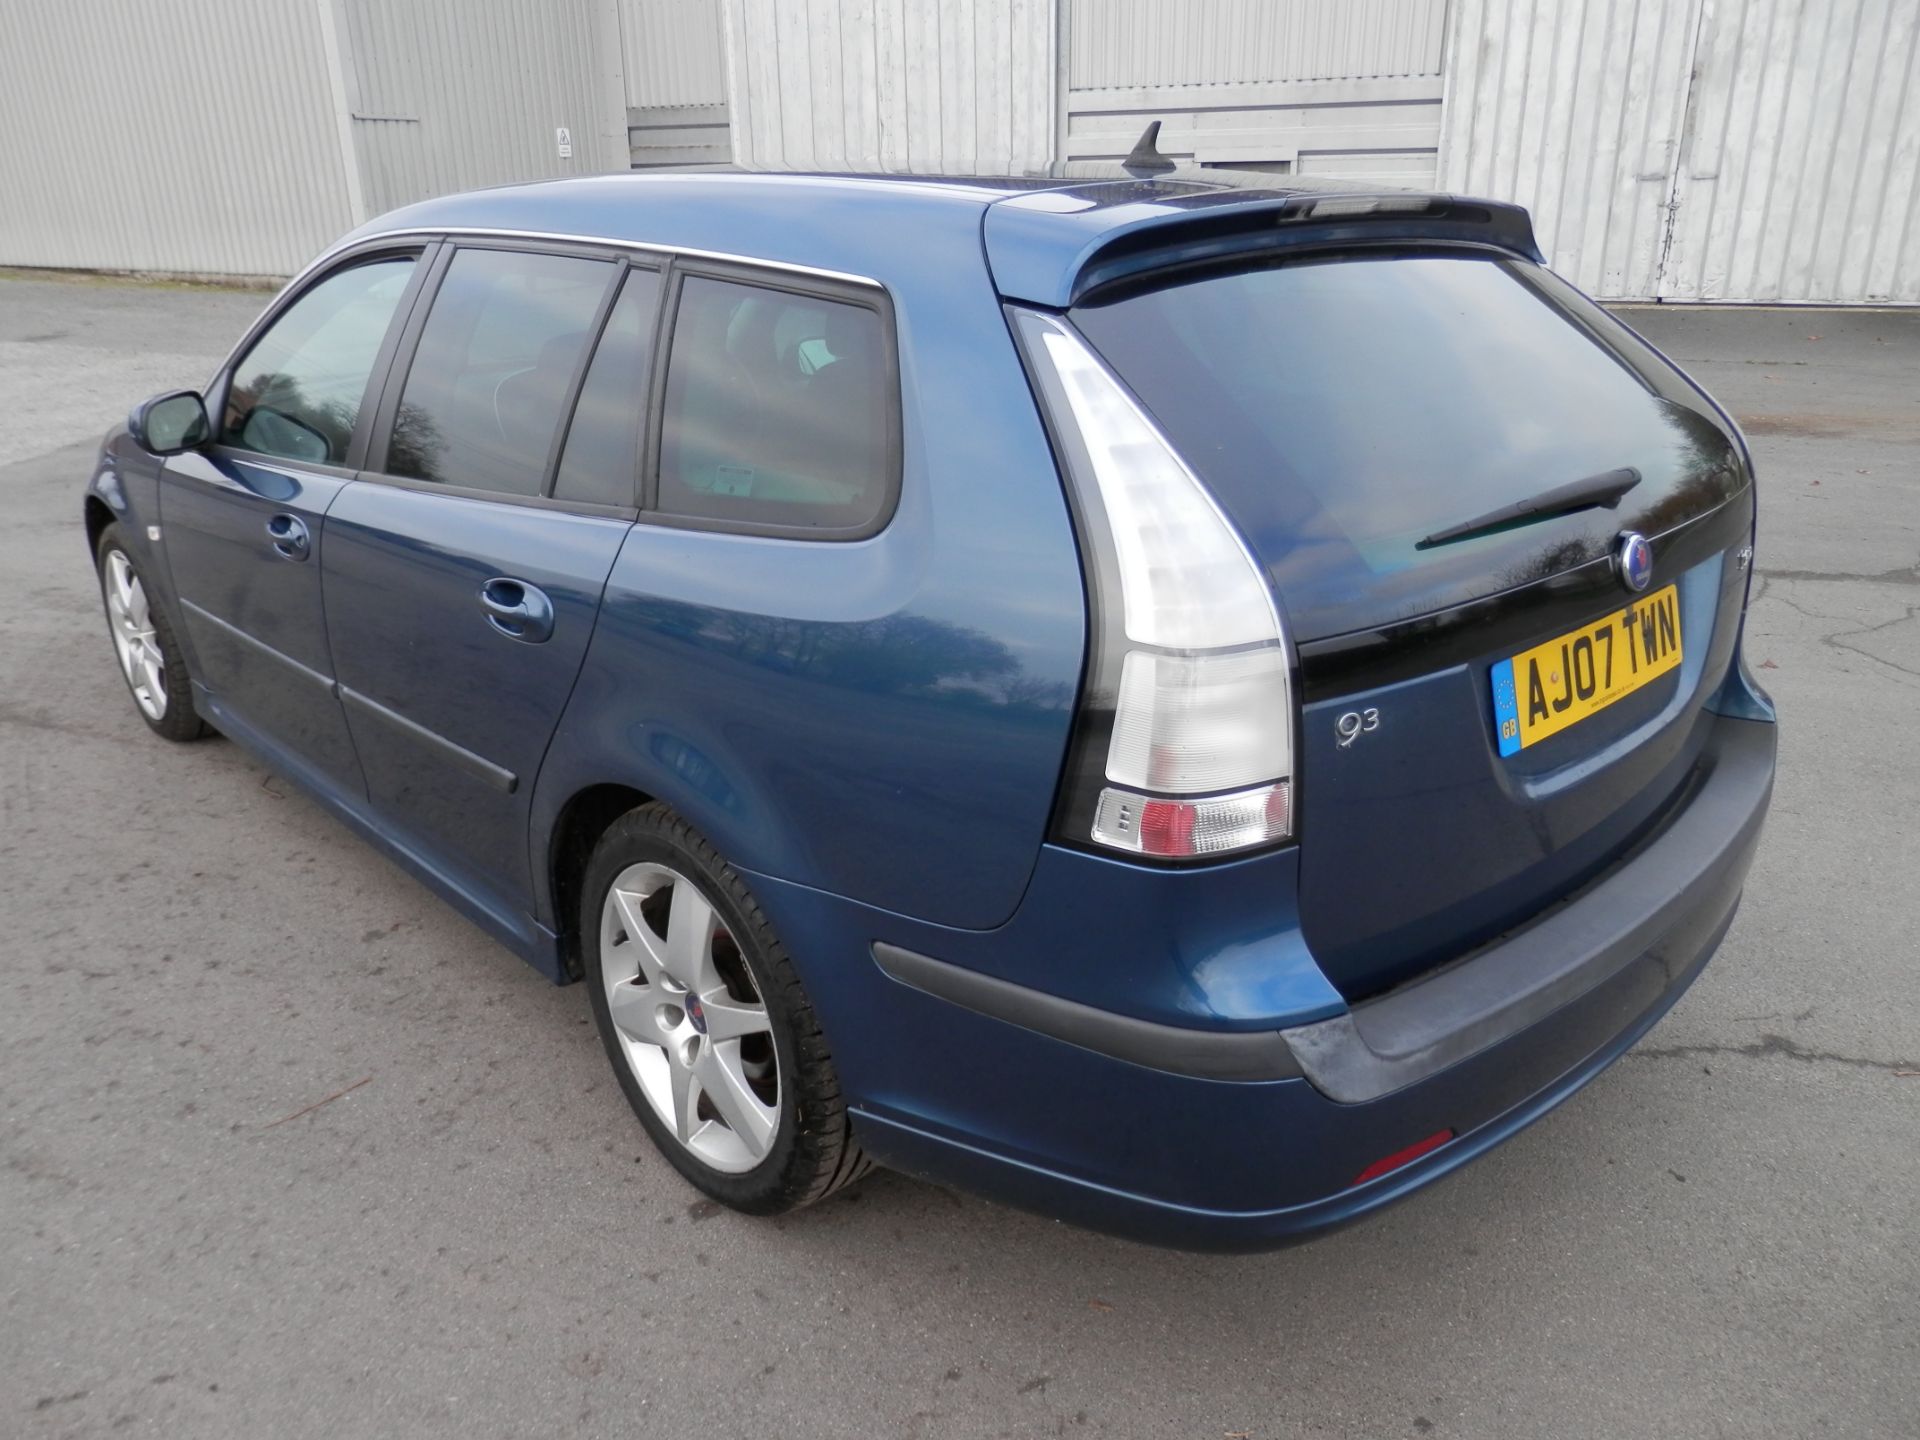 NOW WITH NO RESERVE !! 2007/07 SAAB 93 SPORTWAGON 1.9 TID 120 BHP, 6 SPEED MANUAL, MOT MARCH 2007. - Image 12 of 25